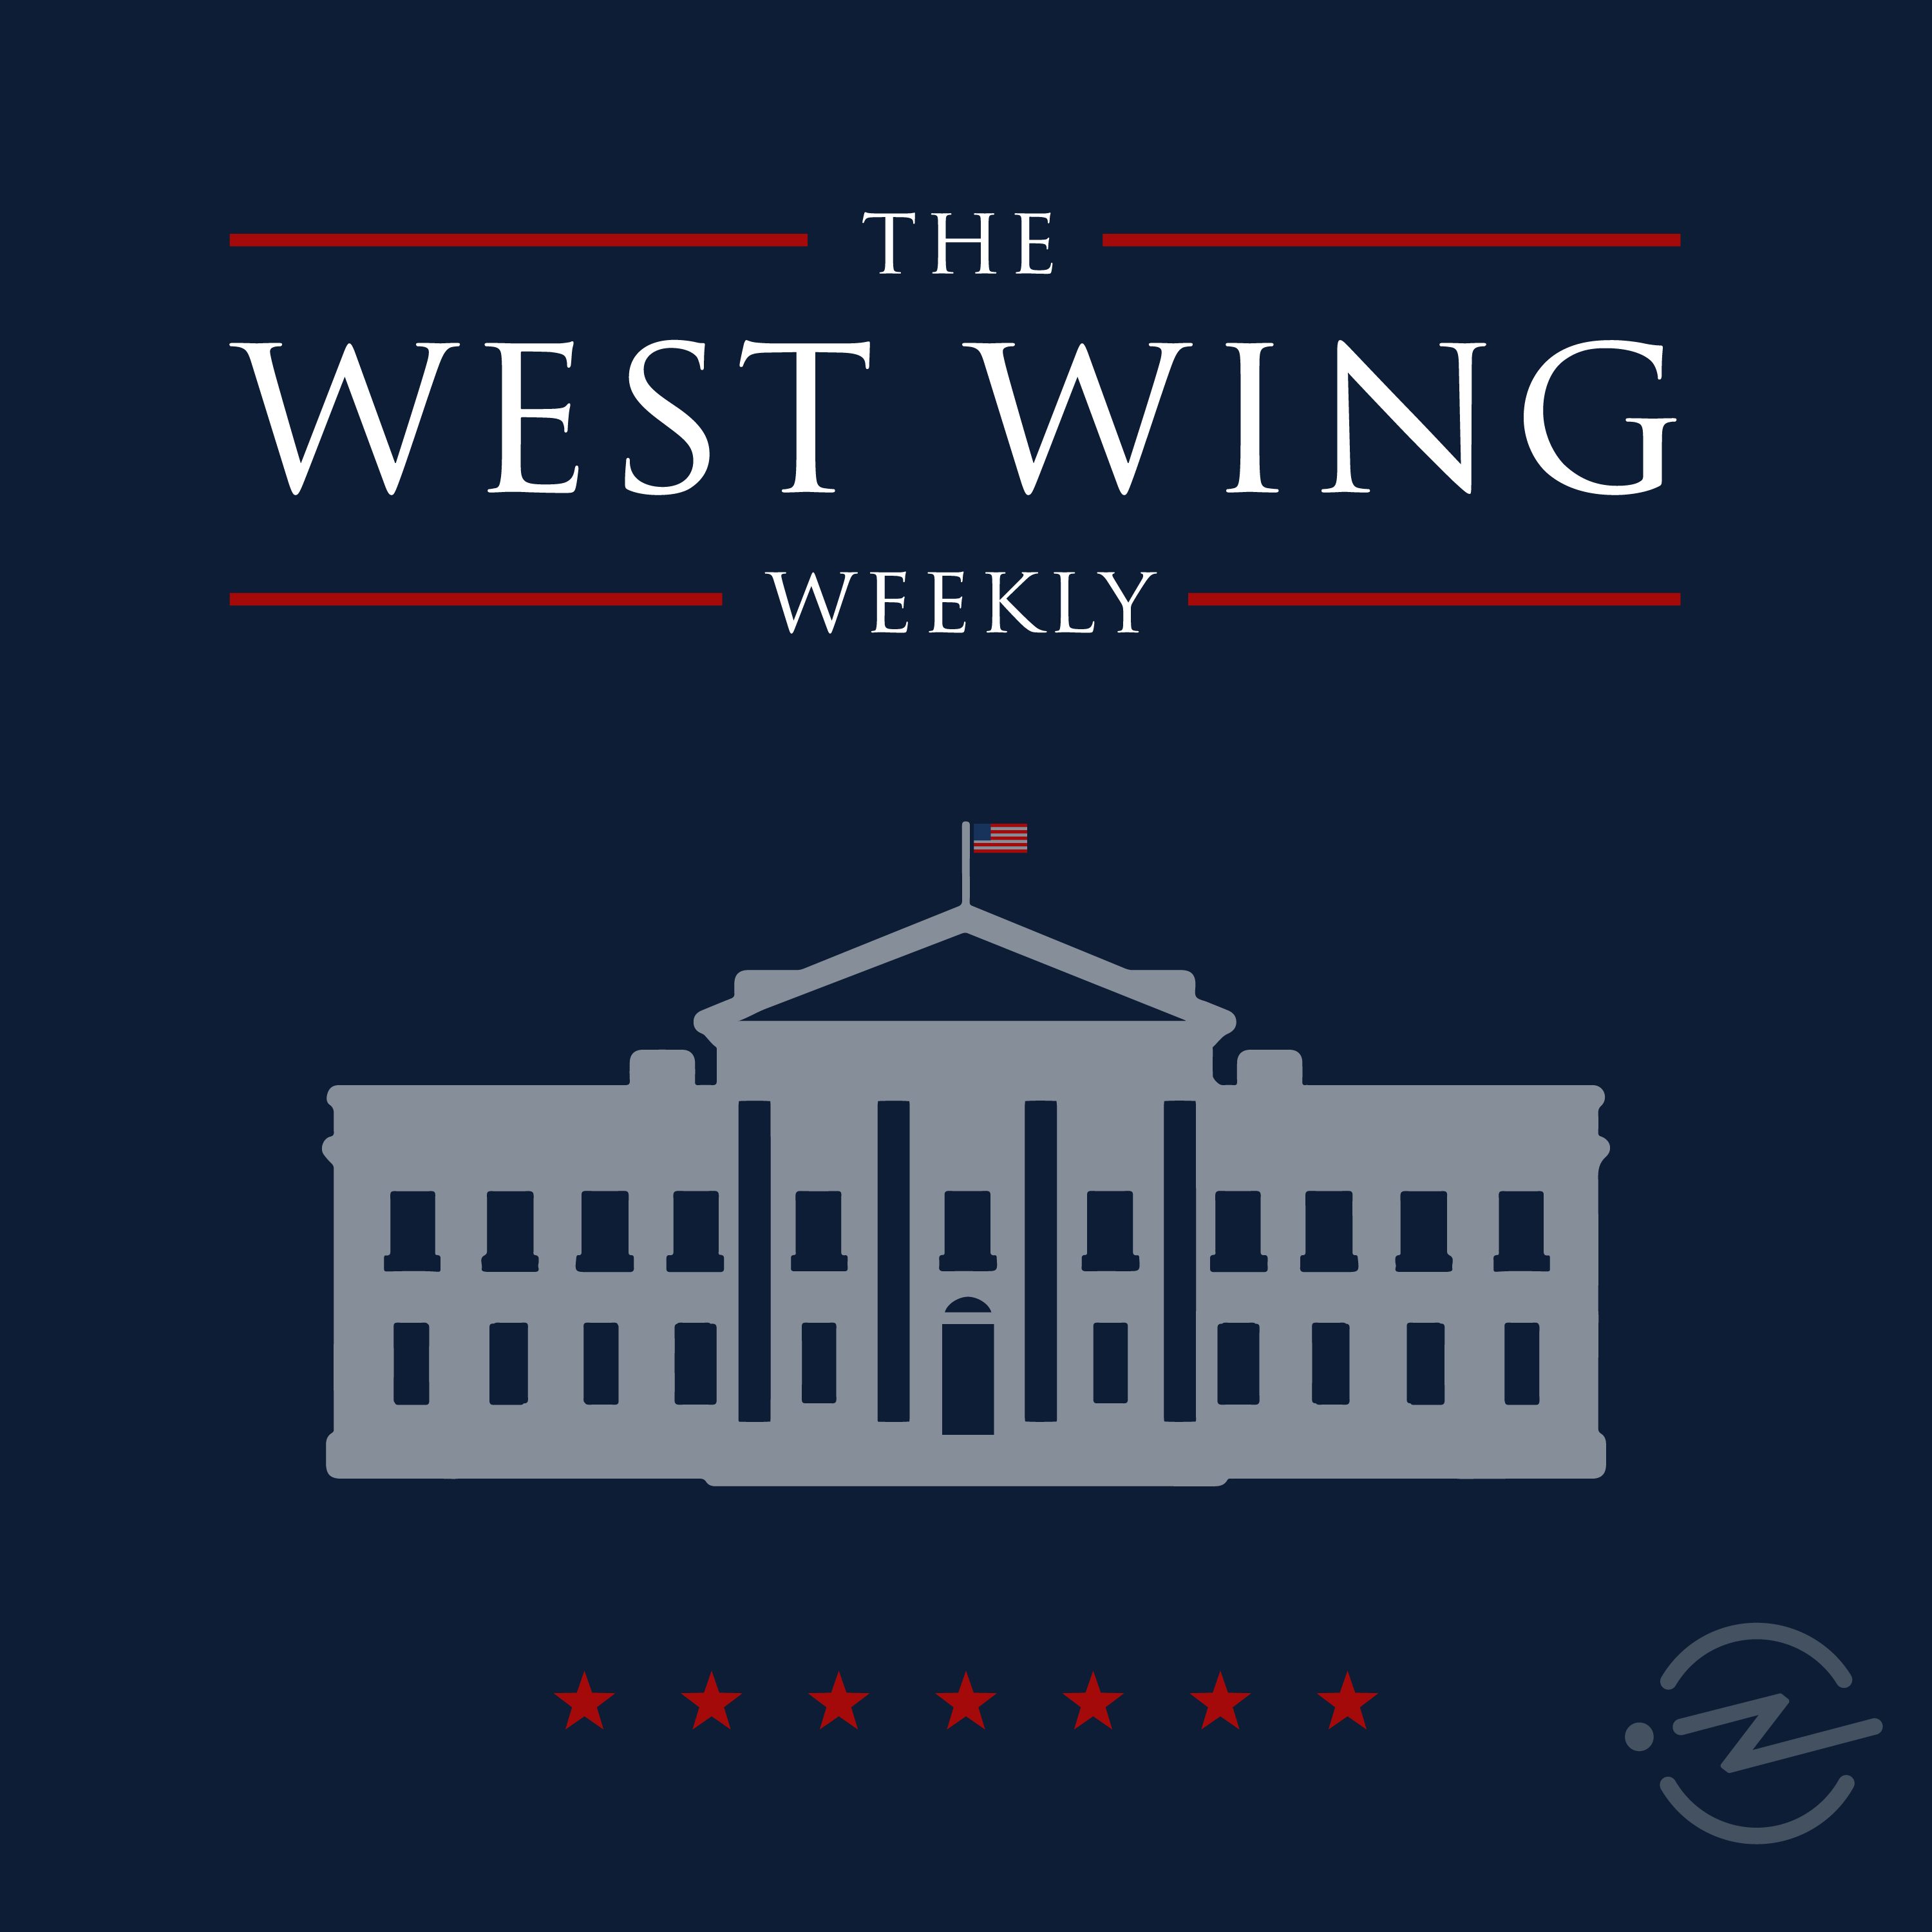 Typos with Aaron Sorkin scripts and The West Wing Weekly.